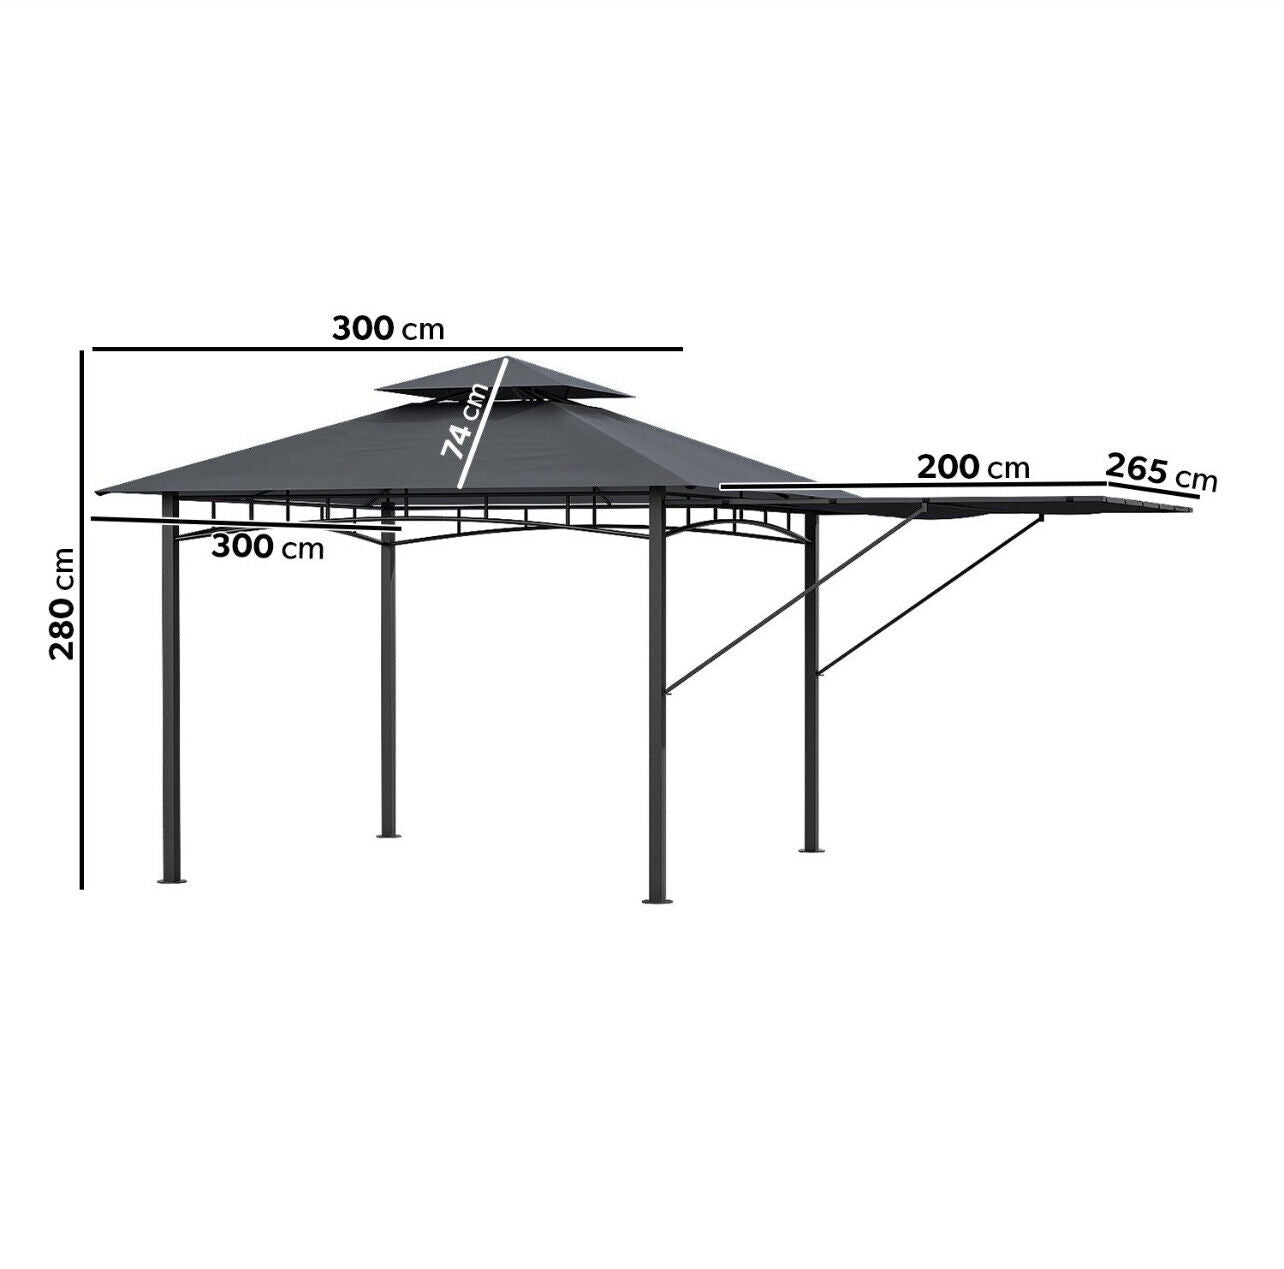 Steel Gazebo in Black and Grey with Ventilated Roof Outdoor Garden Patio